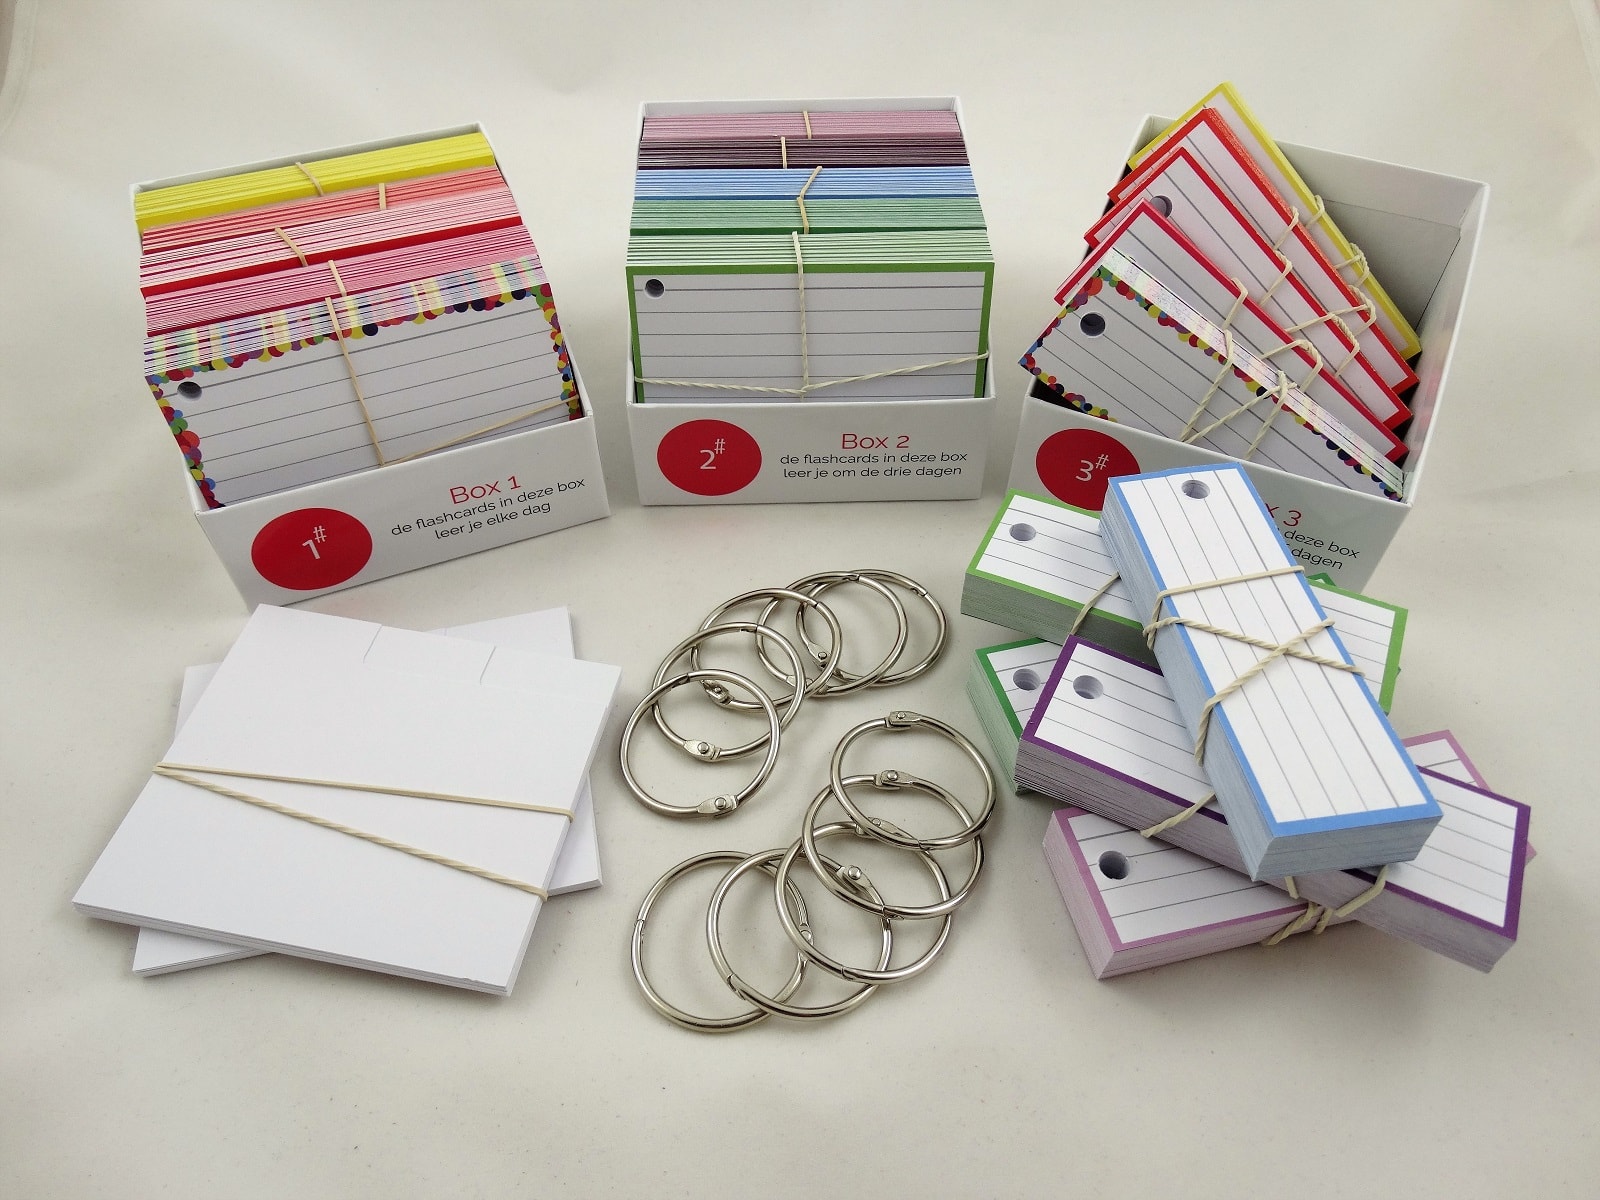 how-to-make-flashcards-step-by-step-flashcards-and-stationery